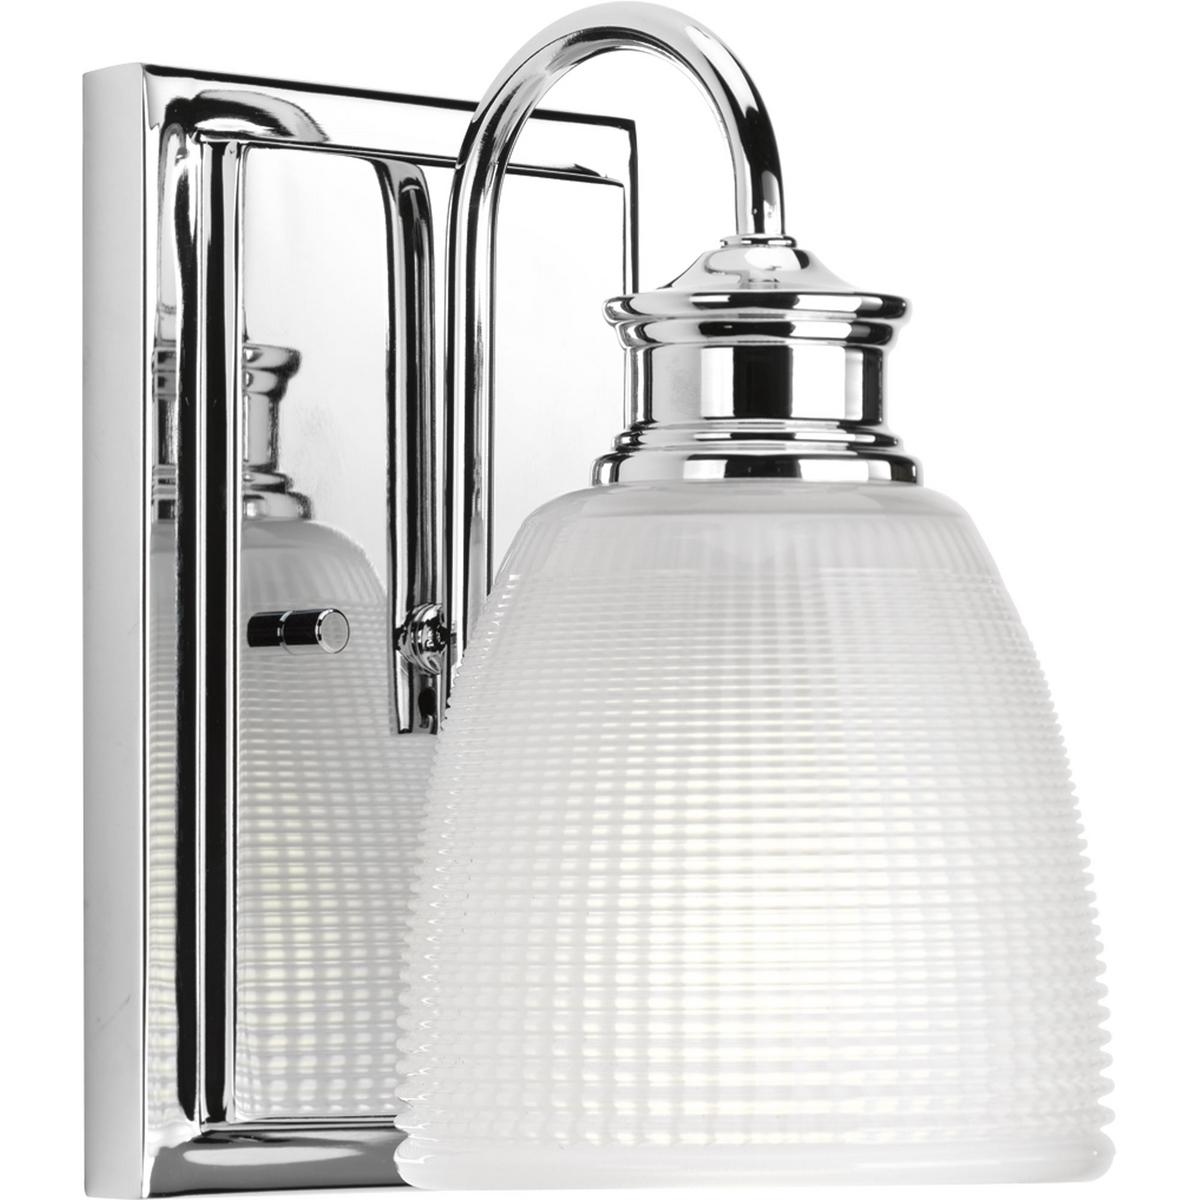 Hubbell P2115-15 One-light bath from the Lucky Collection, with a distinctive design that evokes a vintage flair with finely crafted details. Light is beautifully illuminated through double prismatic frosted glass shades. Polished Chrome finish.  ; Ideal for a bathroom, h